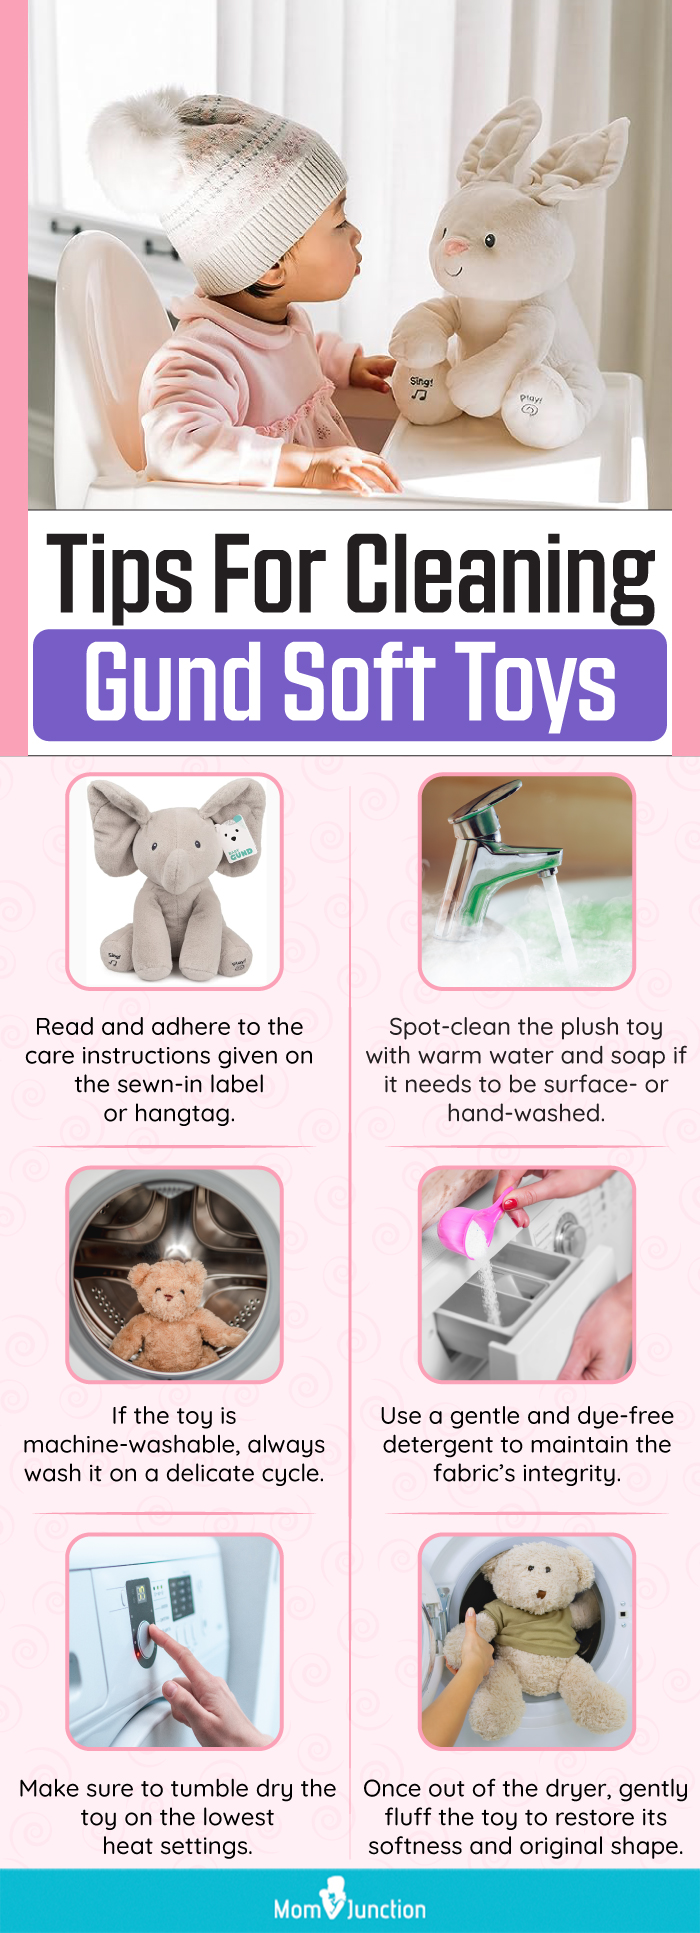 Tips For Cleaning Gund Soft Toys (infographic)